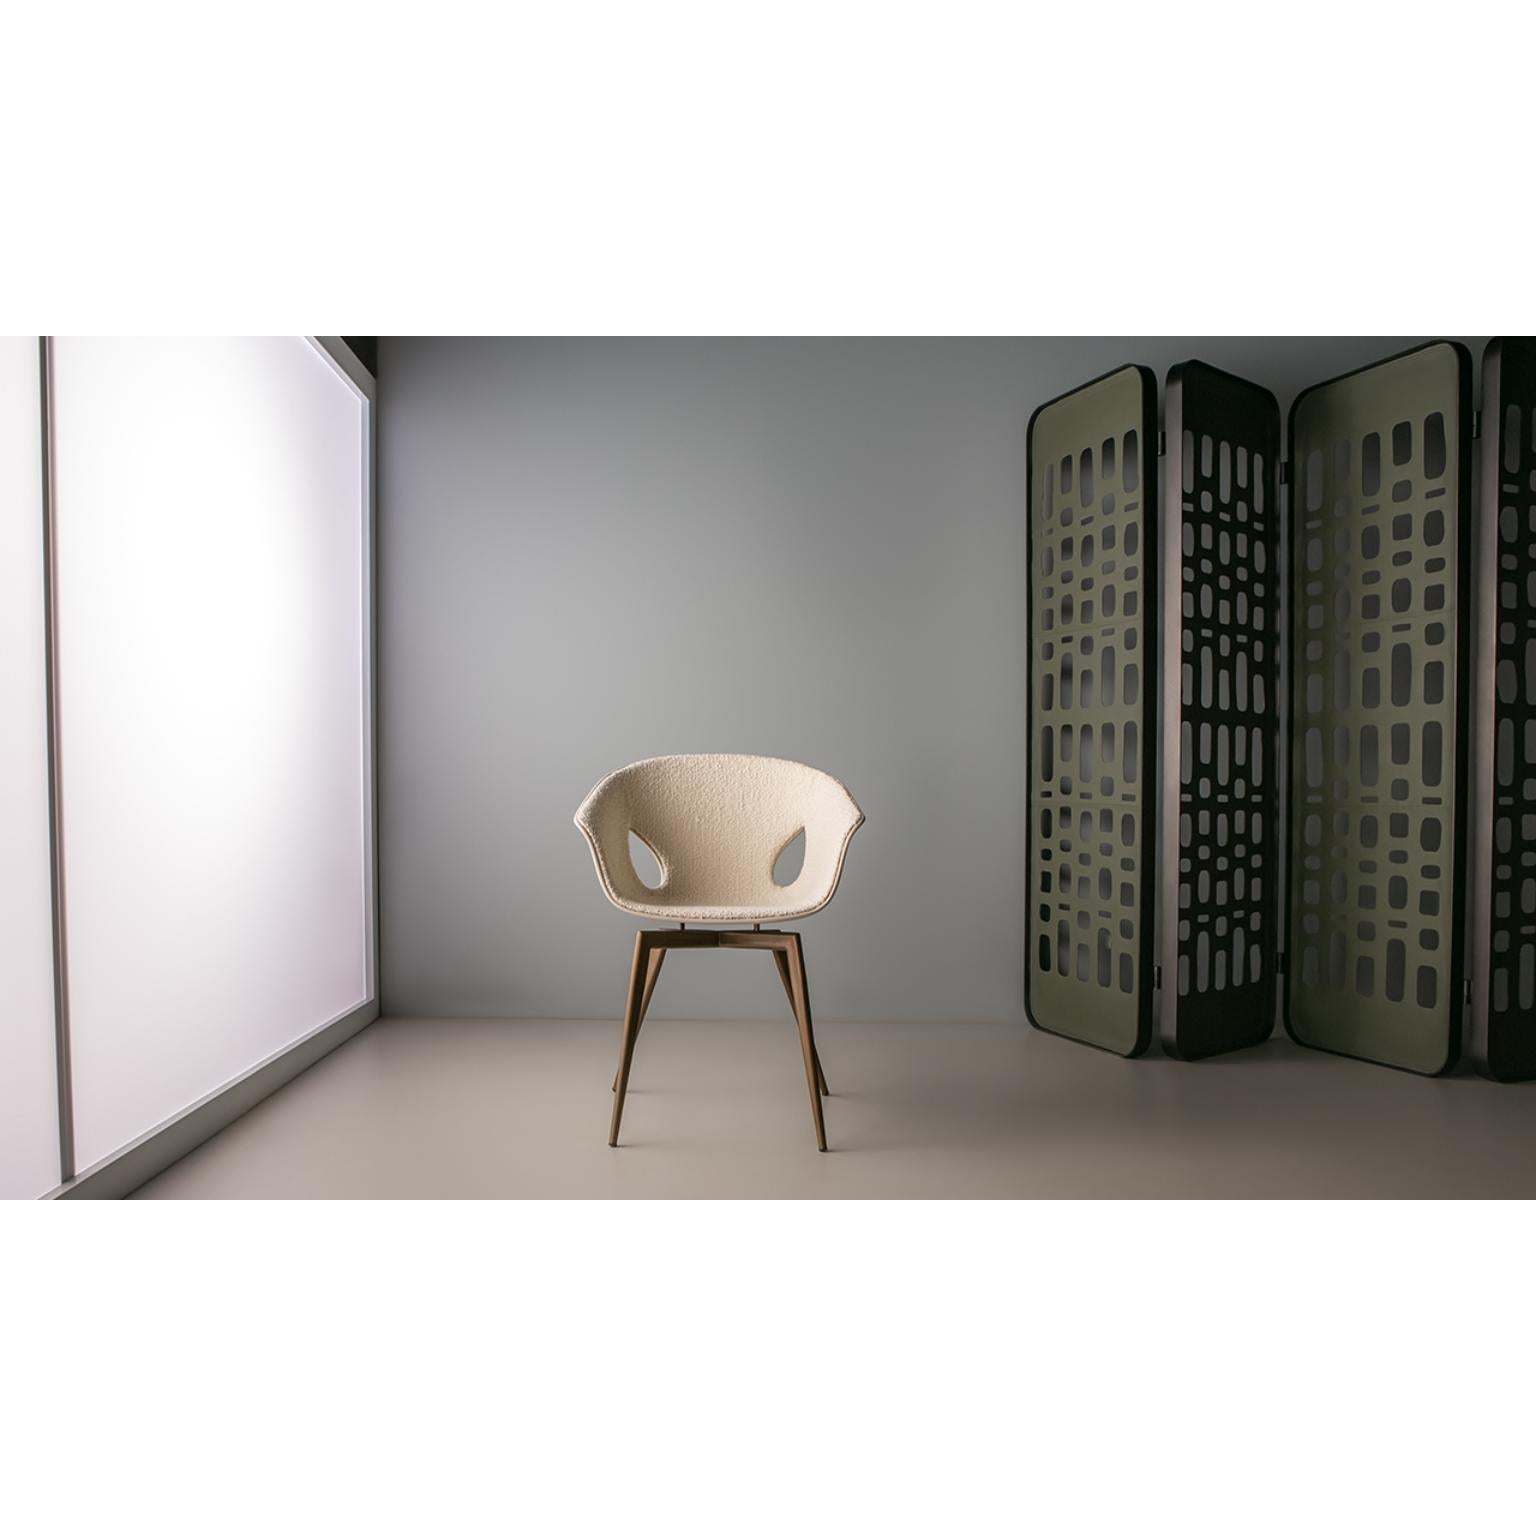 Luuc Chair by Doimo Brasil
Dimensions: W 64 x D 60 x H 82 cm 
Materials: Metal, fiberglass, upholstered seat..


With the intention of providing good taste and personality, Doimo deciphers trends and follows the evolution of man and his space. To